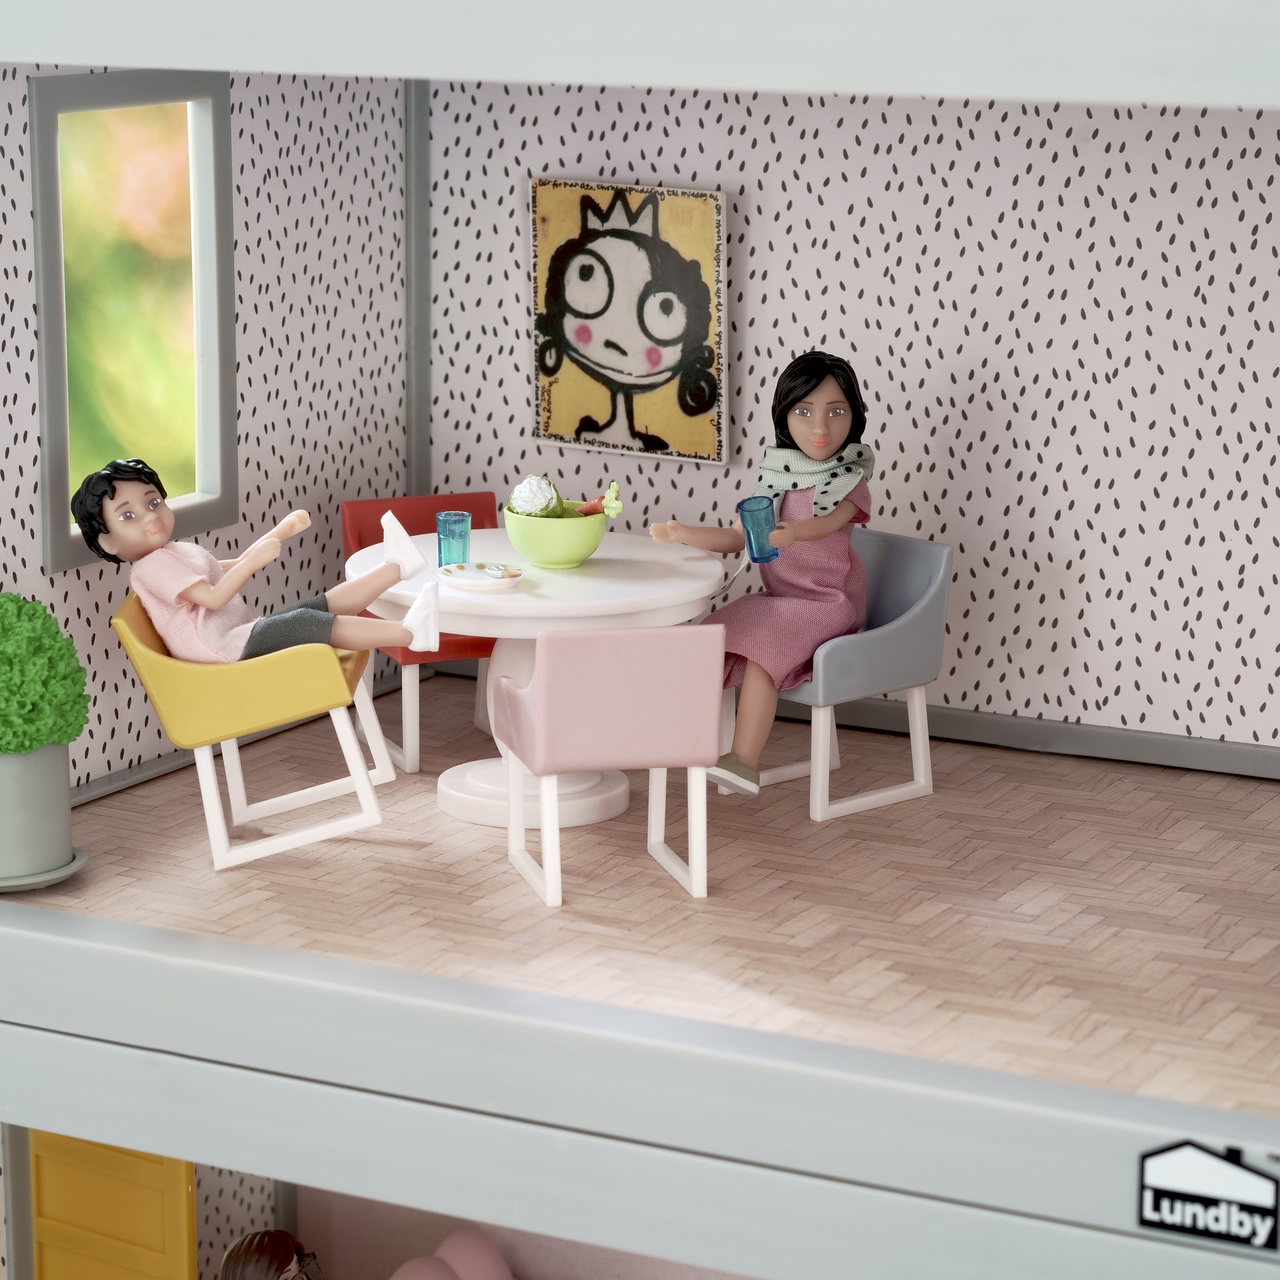 Doll house furniture & doll house accessories lundby dollhouse furniture dining table basic